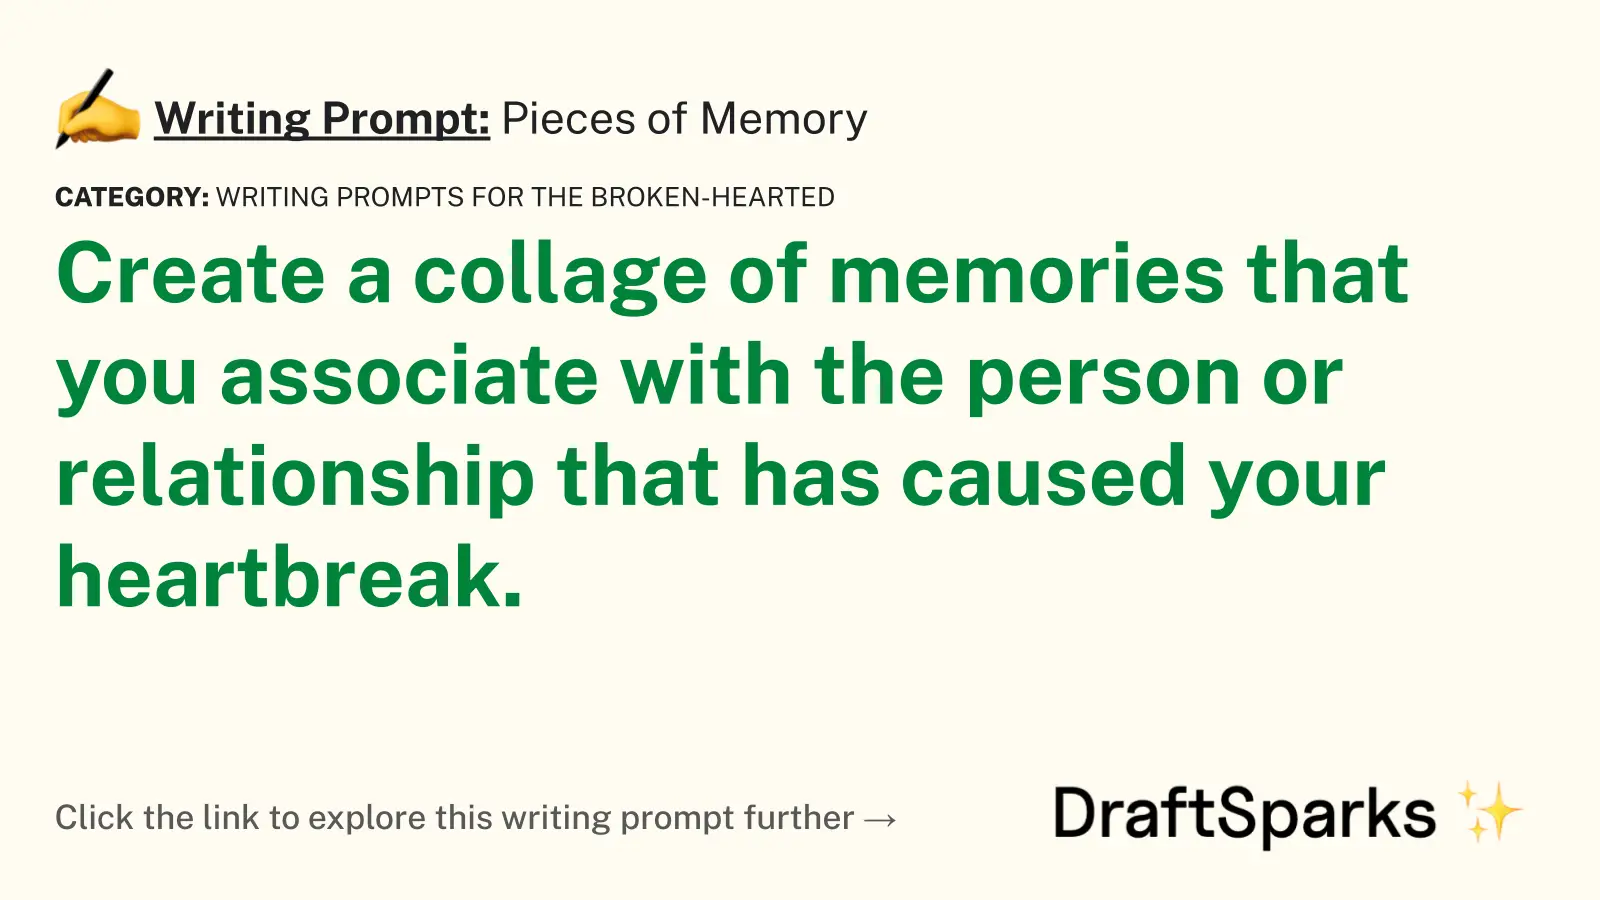 Pieces of Memory